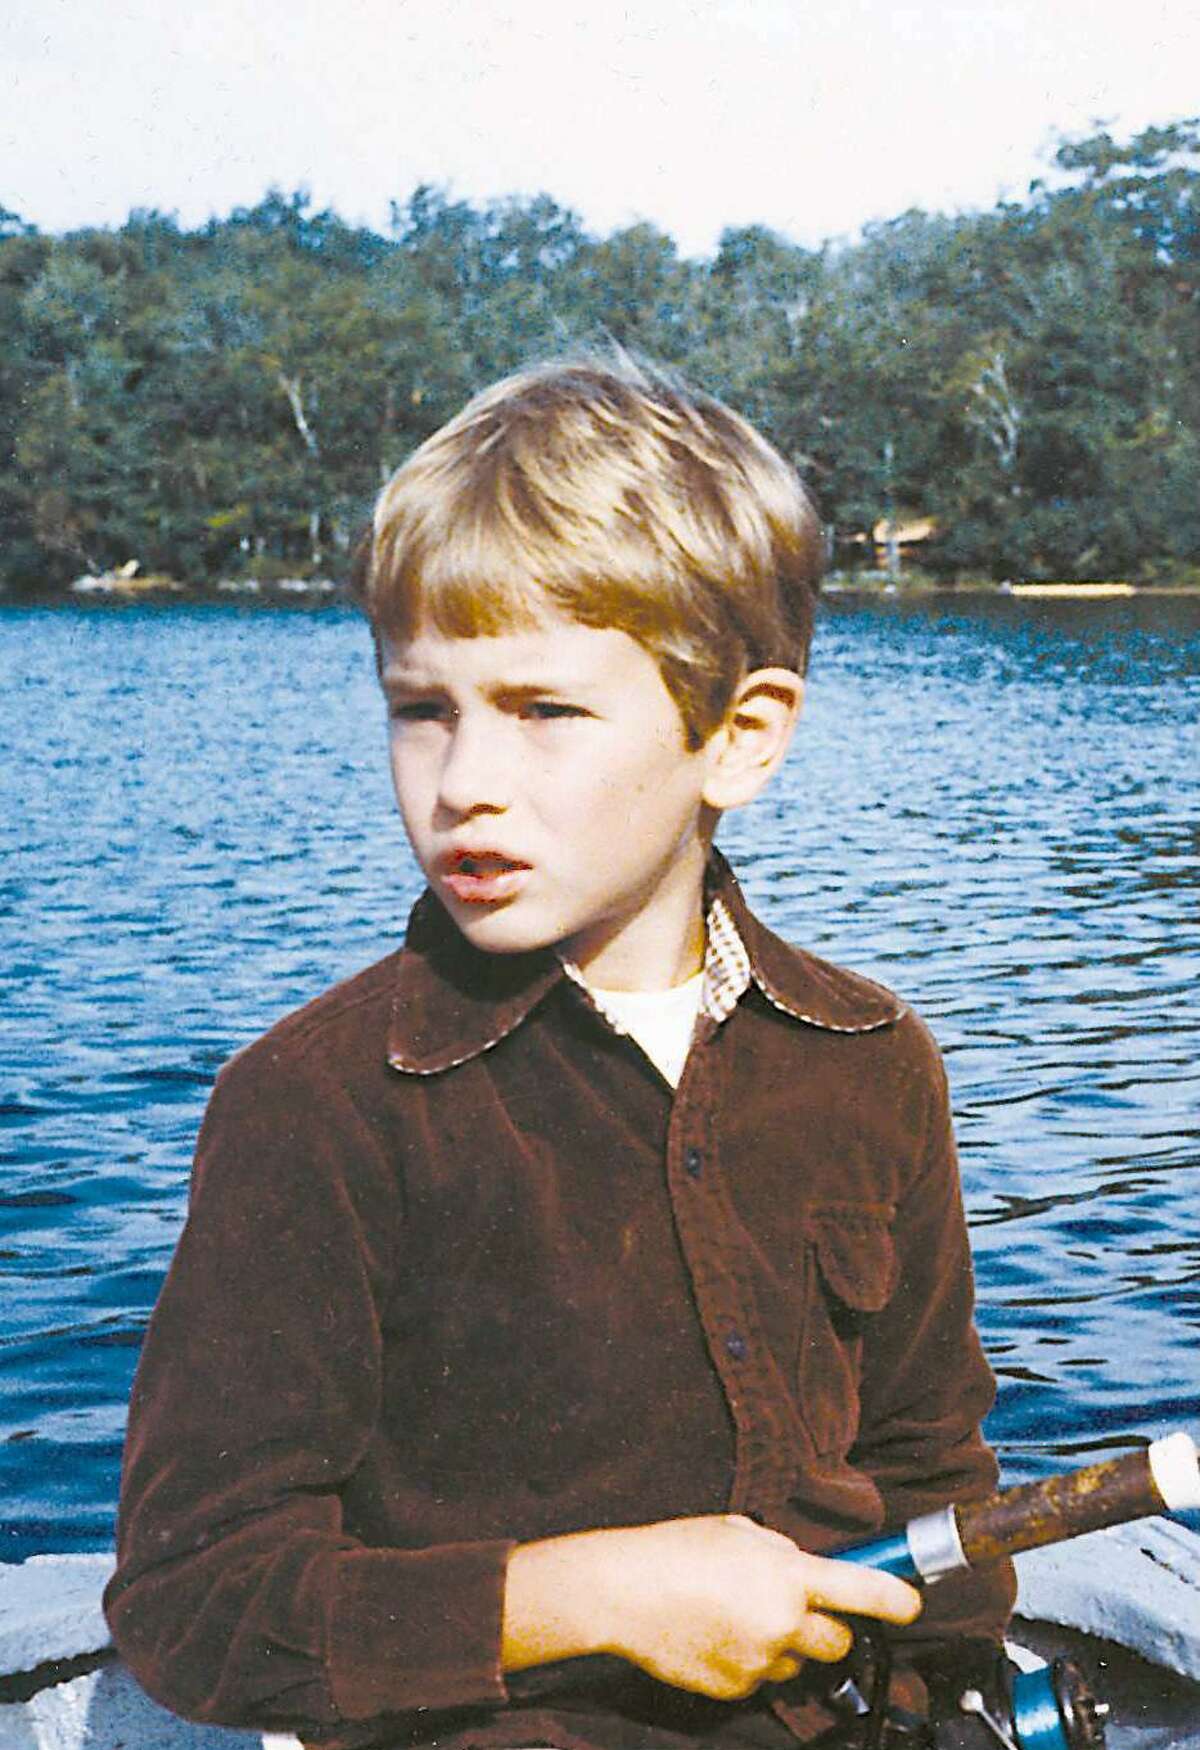 Matthew Margolies, shown in 1982. Margolies was murdered in 1984. The case remains unsolved.